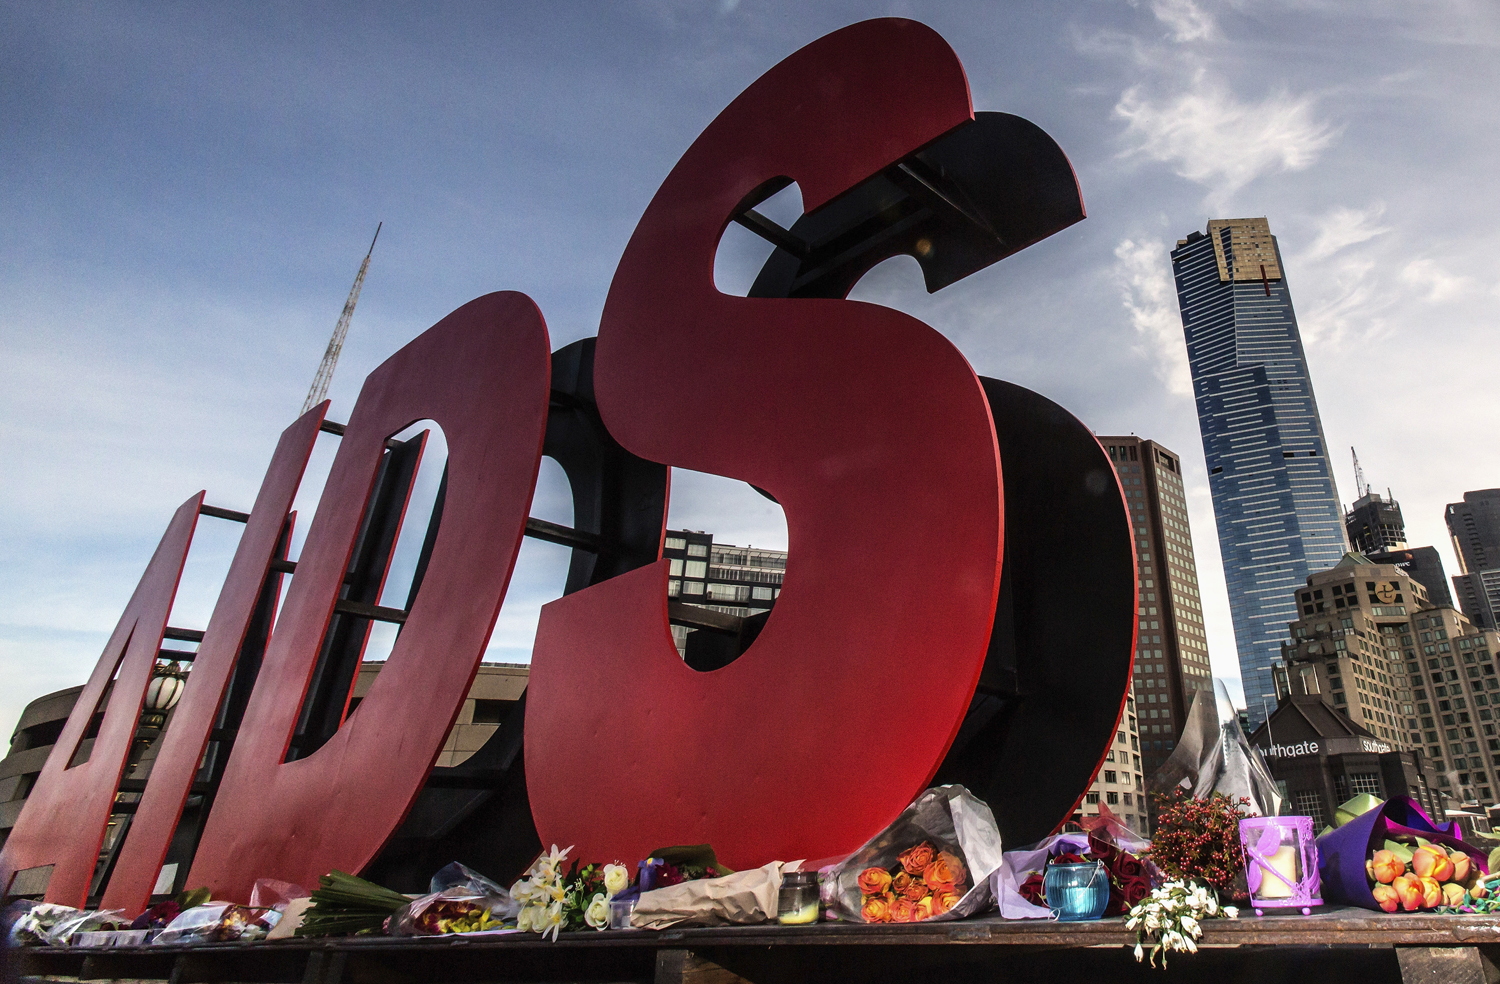 Flowers are laid as tributes to those killed in the Malaysia Airlines flight MH17, at the base of large sign for 20th International AIDS Conference in Melbourne